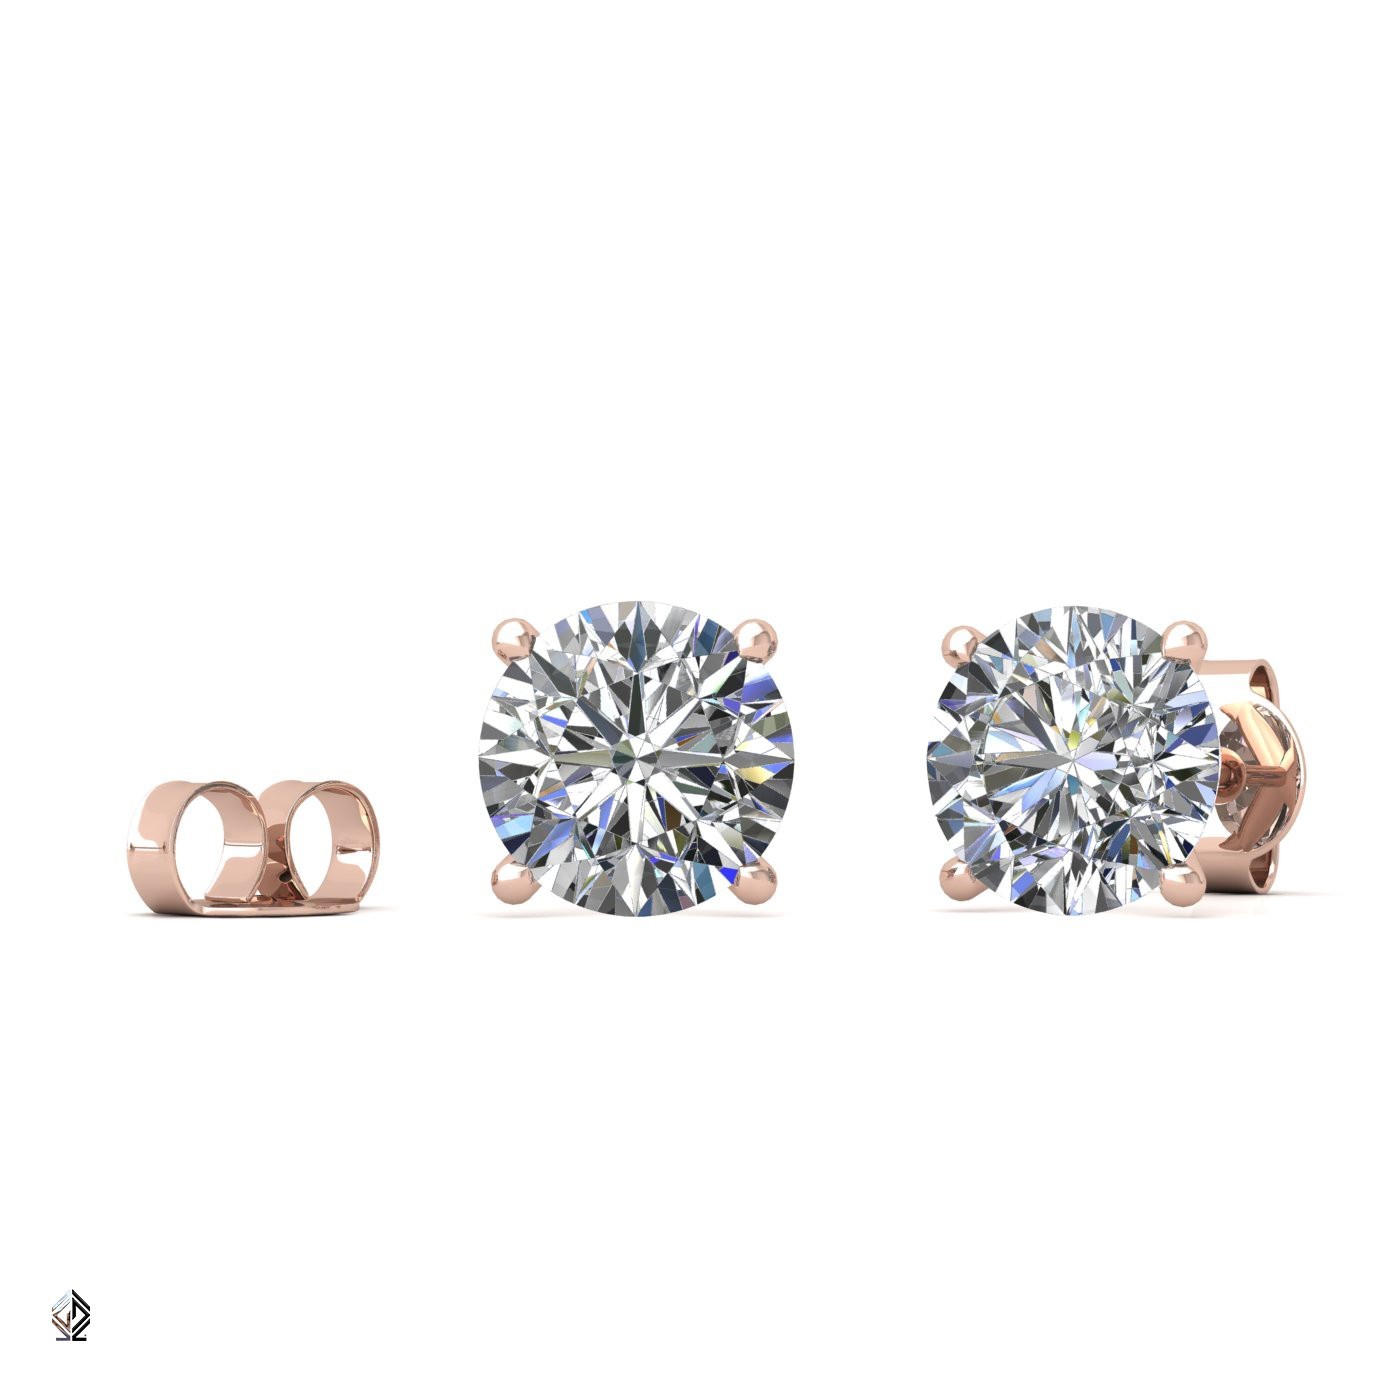 18k rose gold 0,3 ct 4 prongs round cut classic diamond earring studs Photos & images